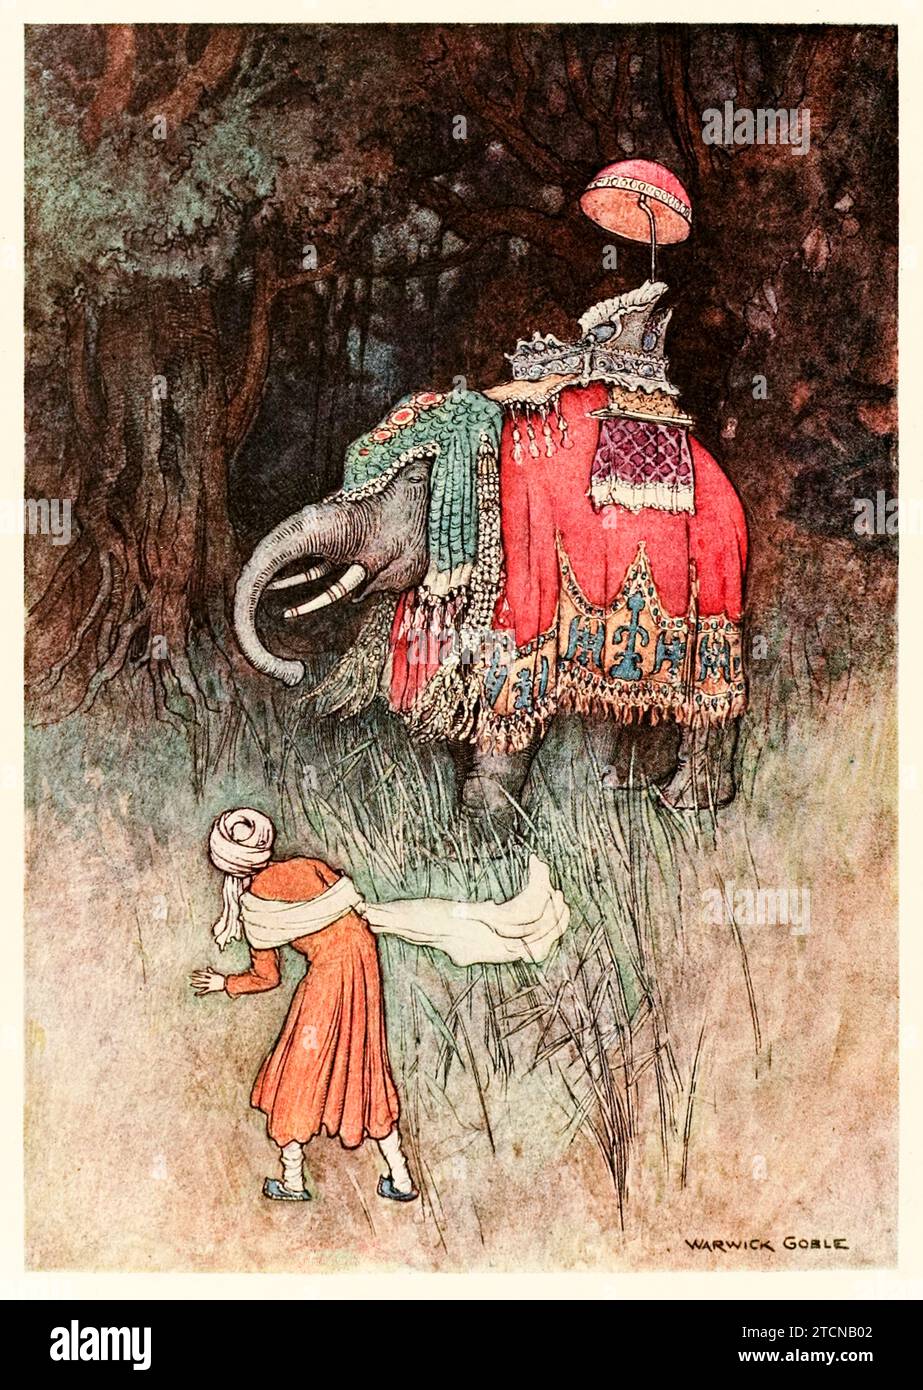 ‘On a sudden an elephant gorgeously caparisoned shot across his path’ from ‘Folk-tales of Bengal’ by Lal Behari Day (1824-1882), illustration by Warwick Goble (1862-1972). Photograph from a 1912 edition. Credit: Private Collection / AF Fotografie Stock Photo